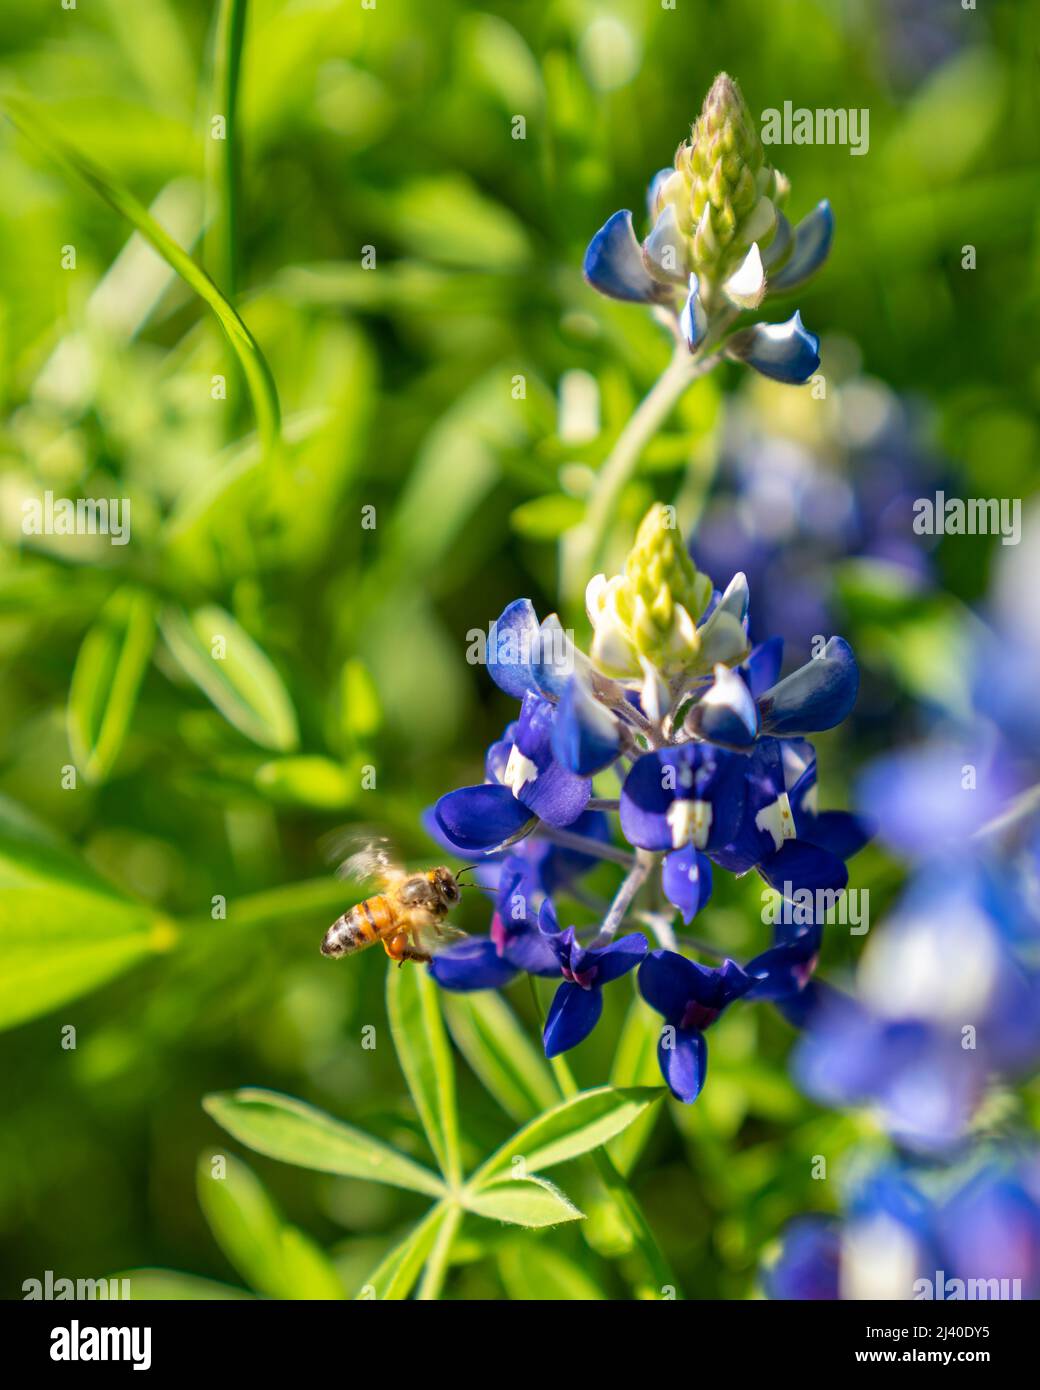 Closeup of a bumble bee collecting pollen on bluebonnets, Lupinus texensis, during an early spring bloom near Ennis, Texas. Stock Photo